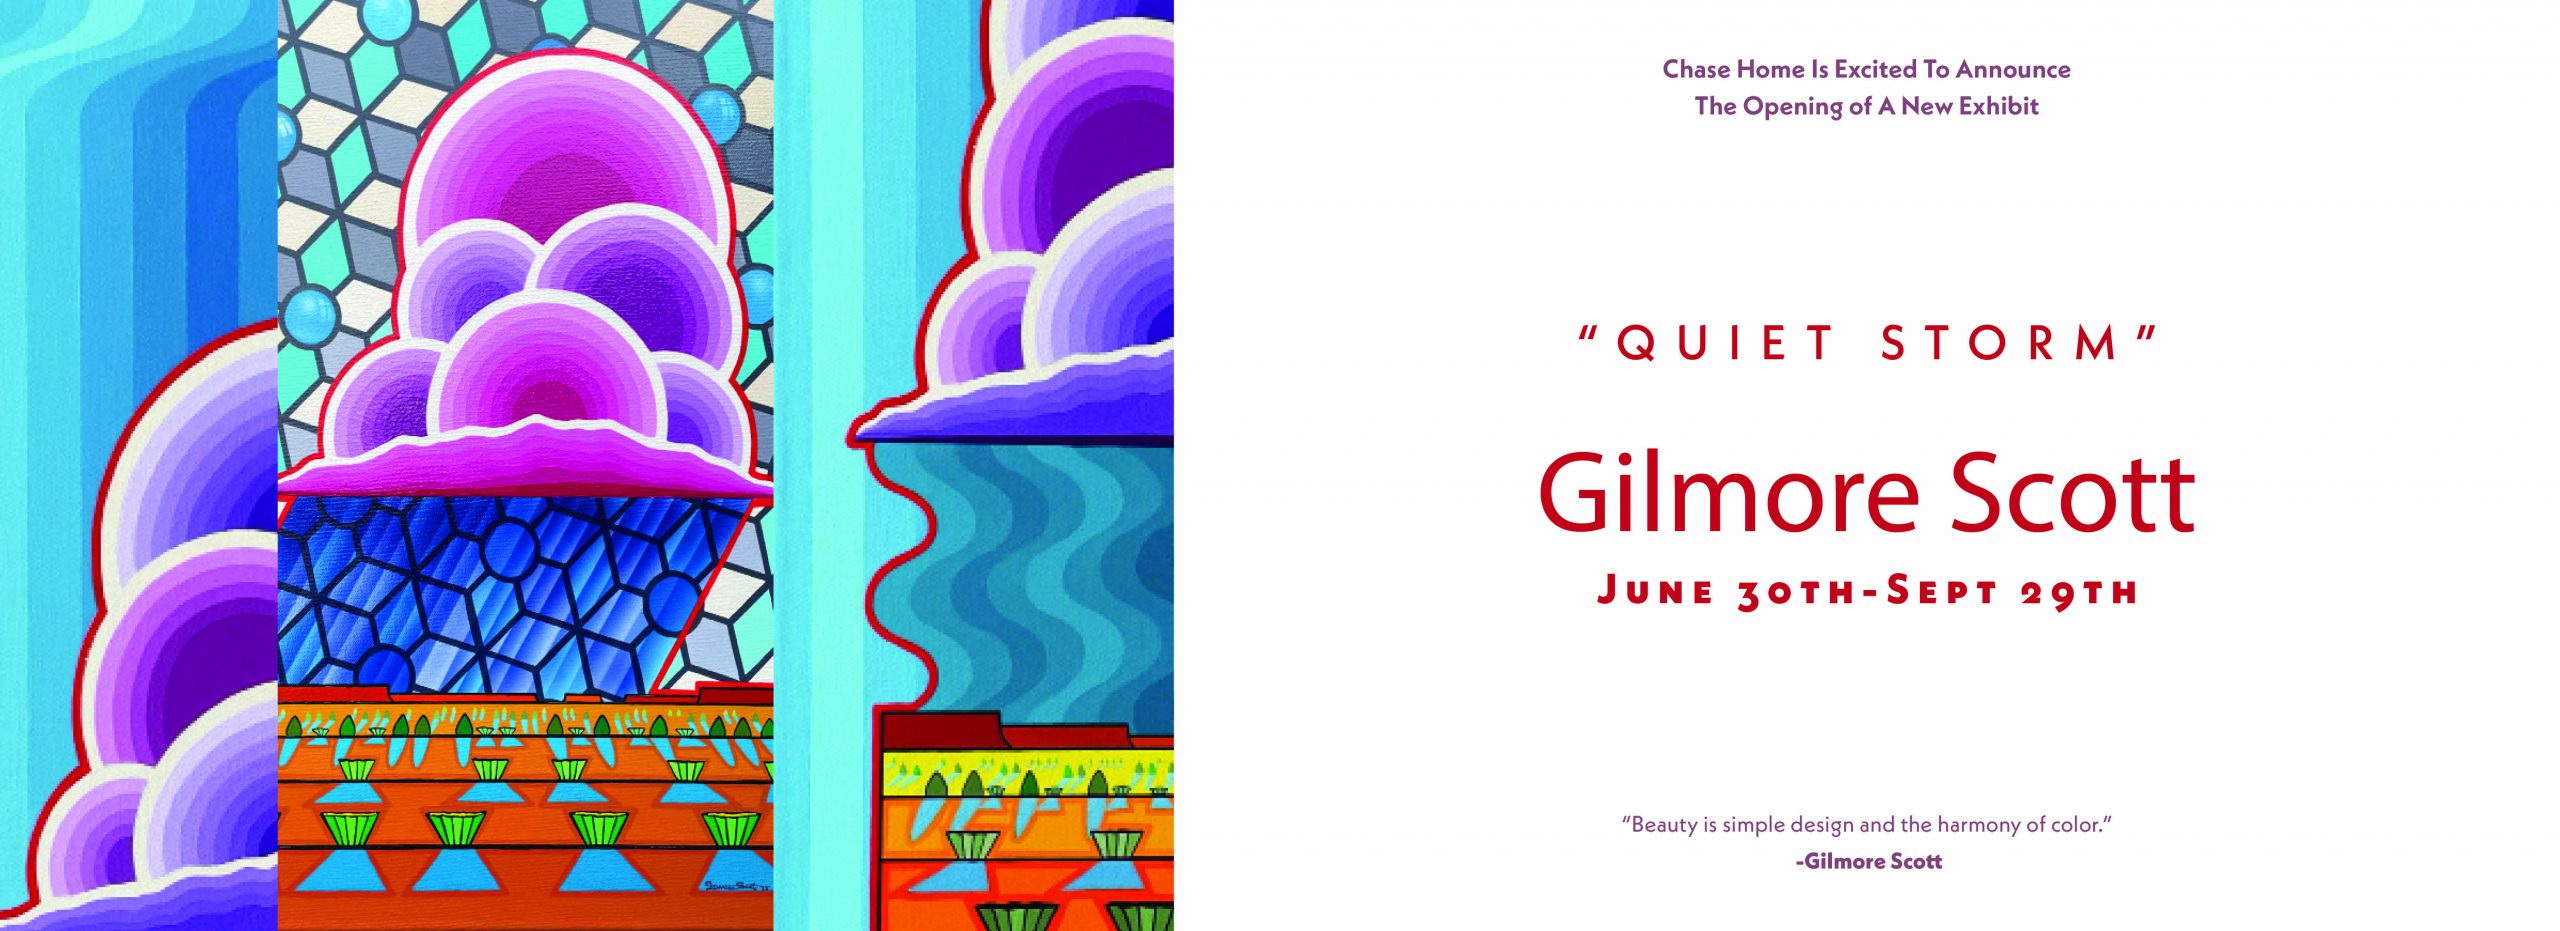 "Quiet Storm." Gilmore Scott. June 30th to September 29th. Chase Home Museum of Utah Folk Arts in Liberty Park.